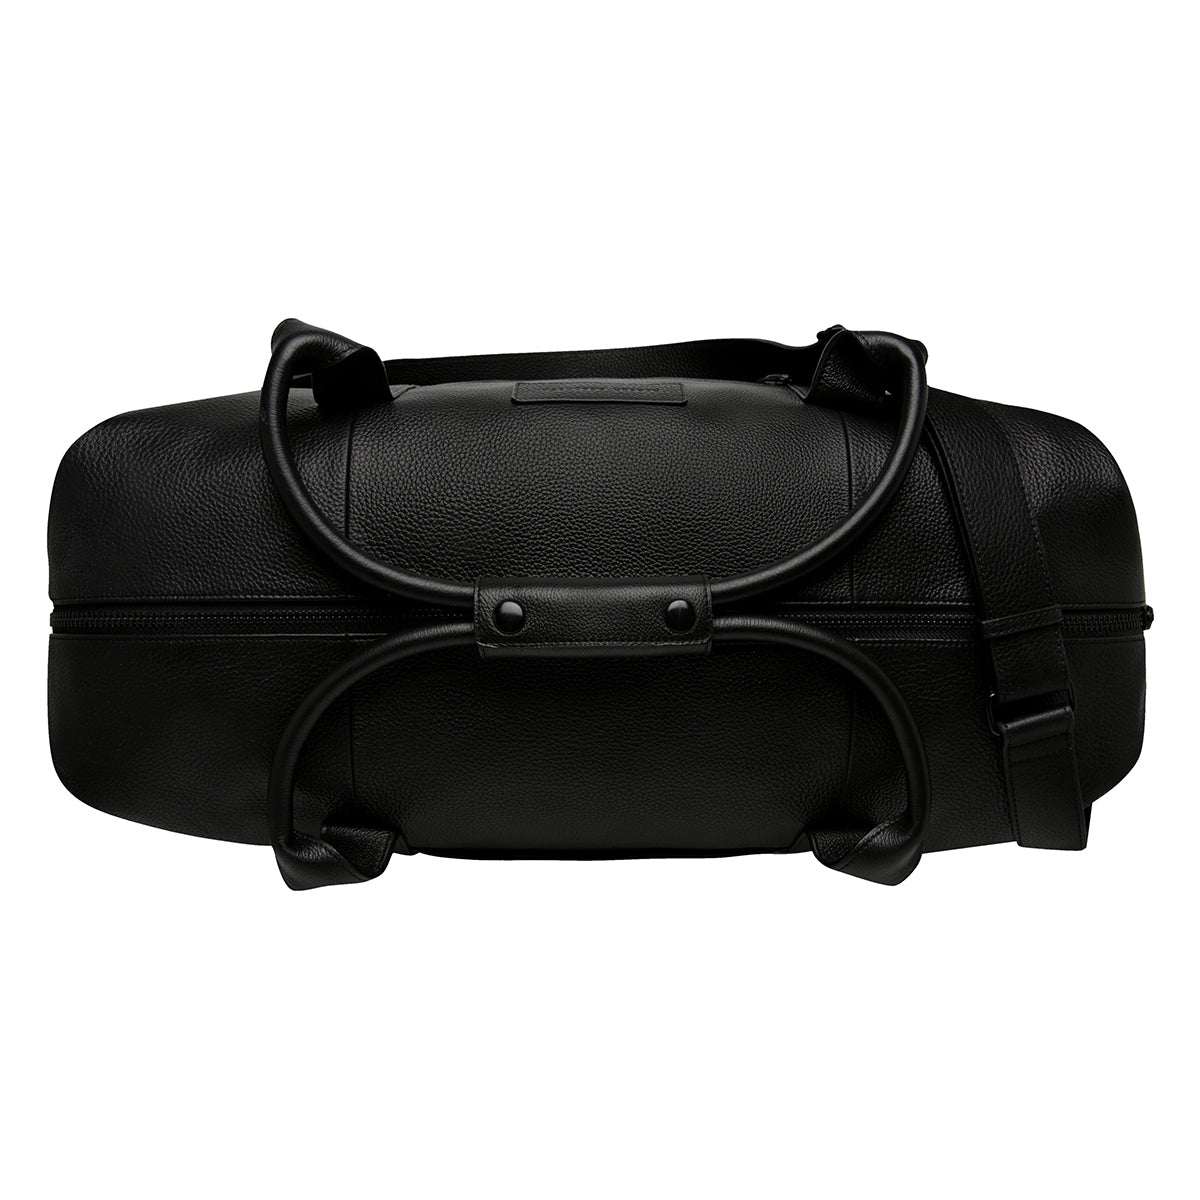 Status Anxiety everything I wanted duffle bag leather black